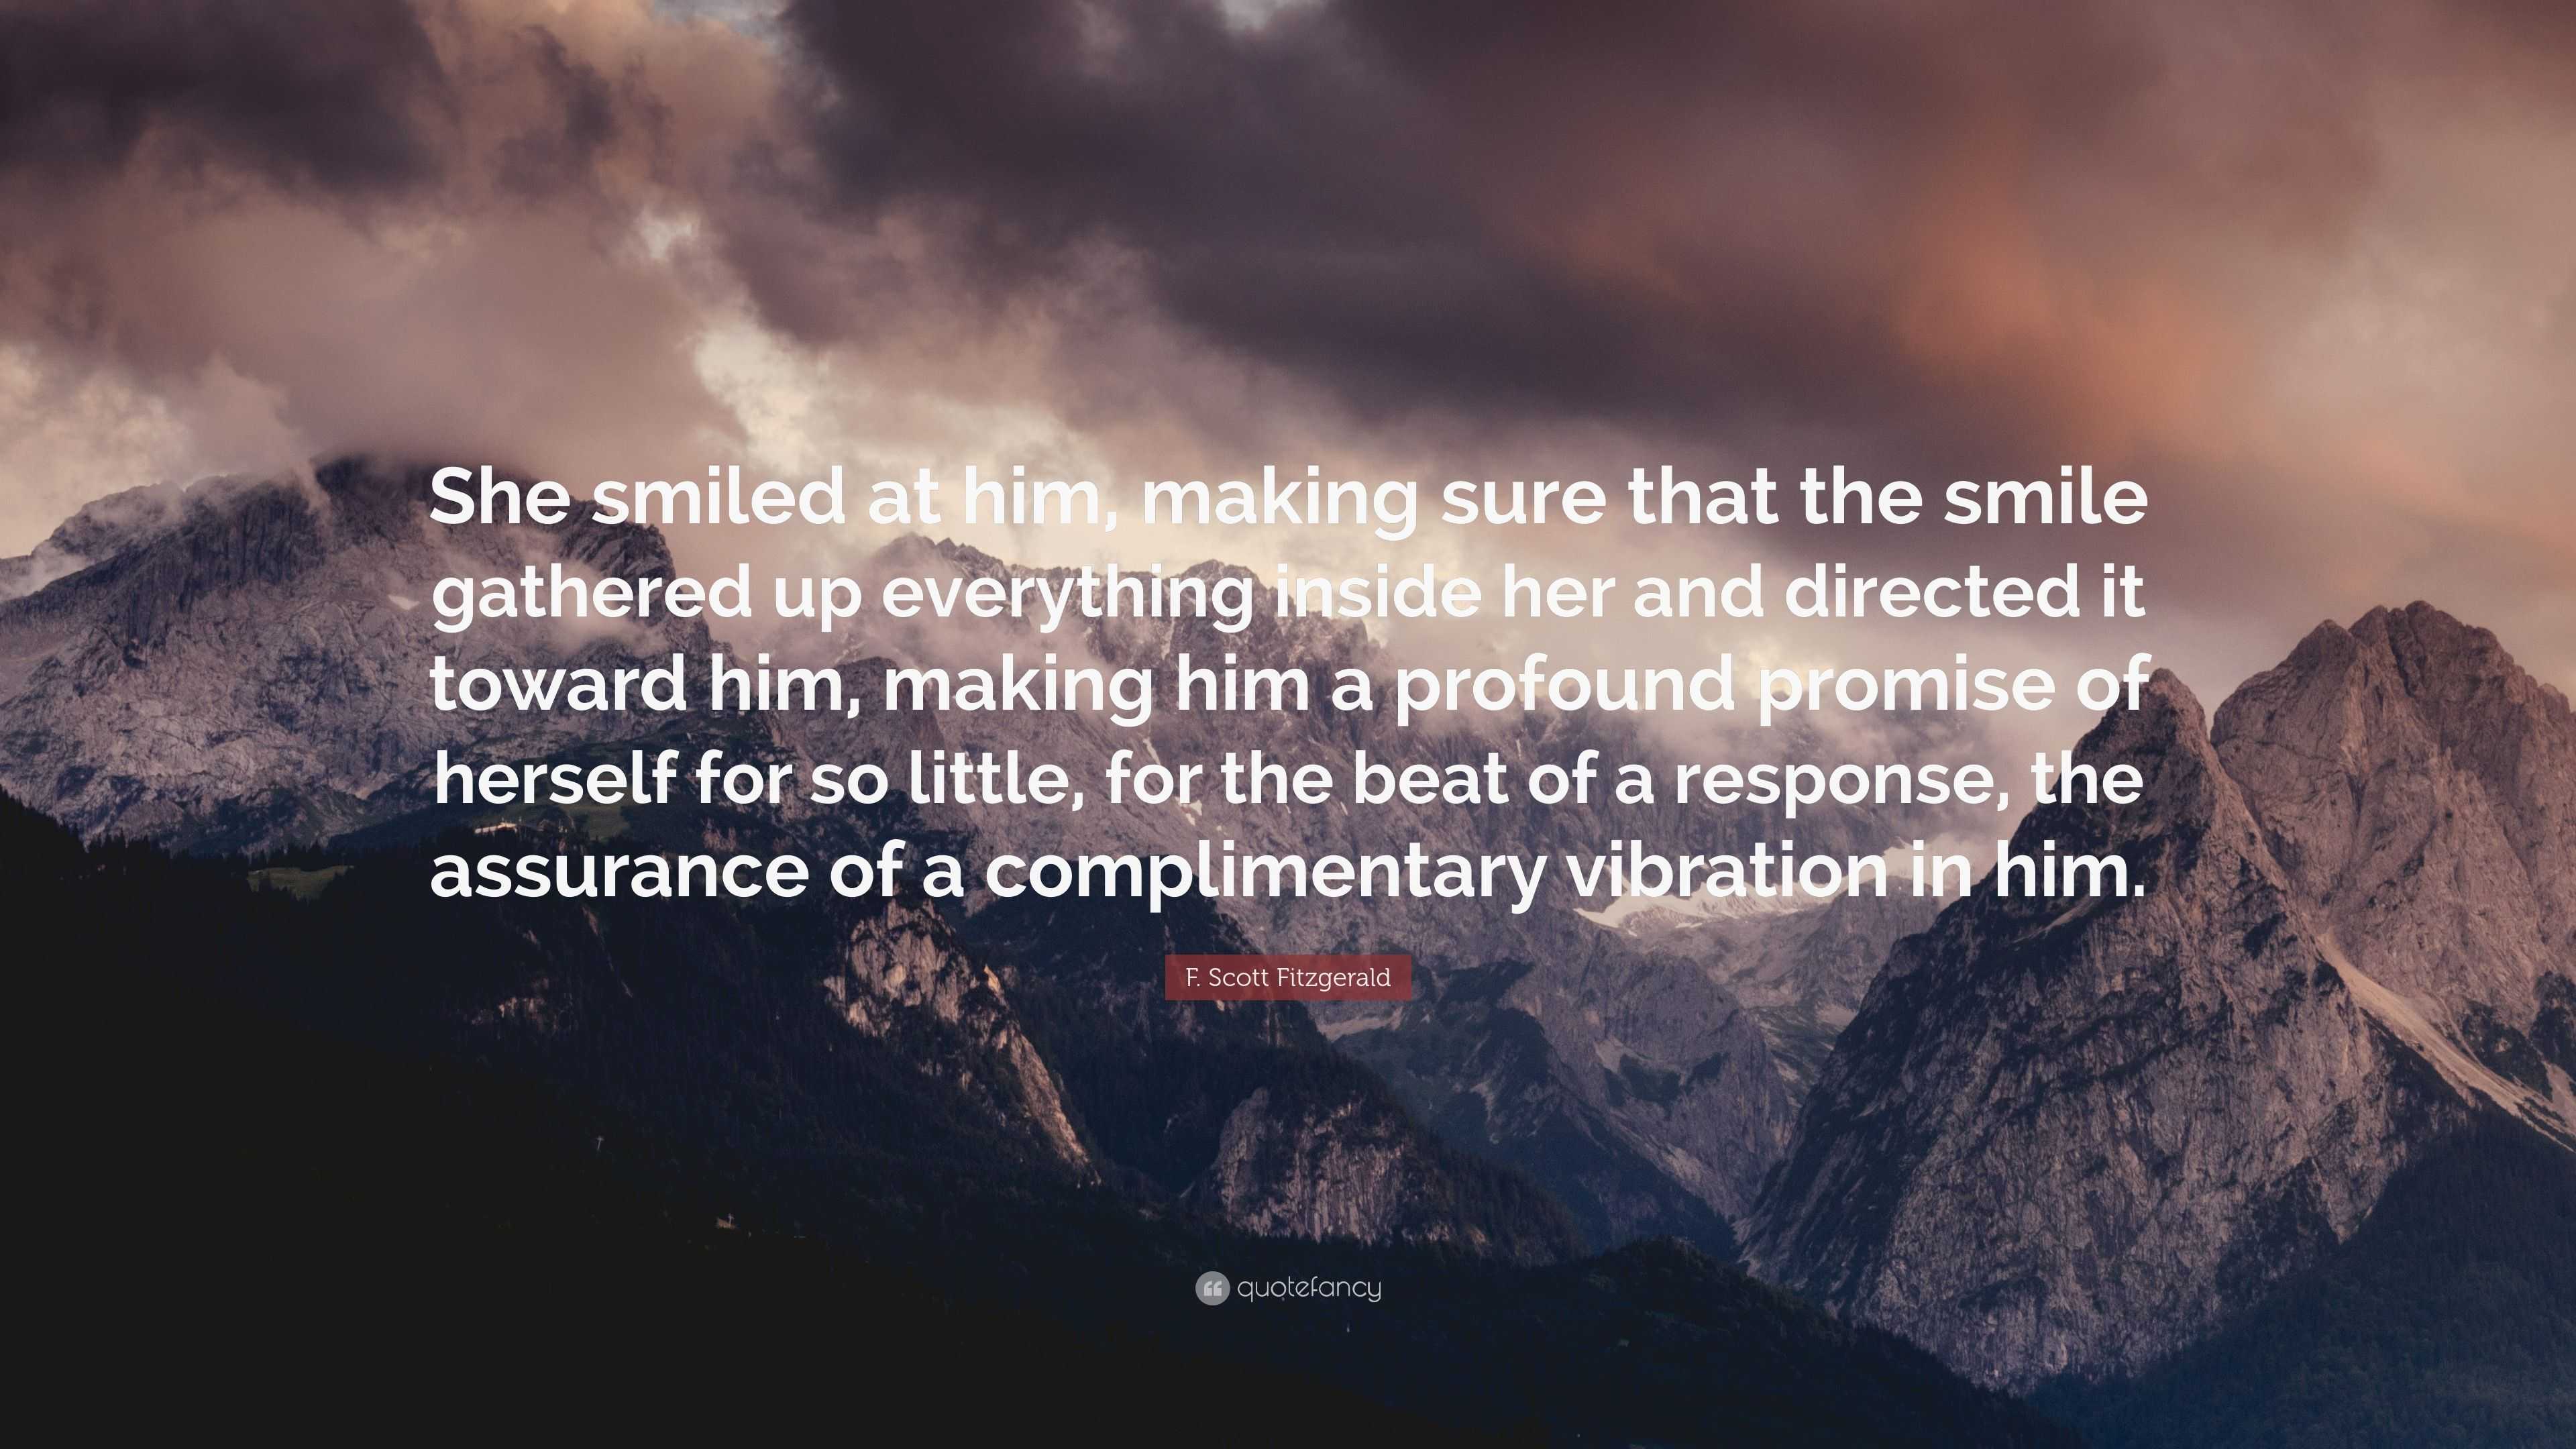 F Scott Fitzgerald Quote “she Smiled At Him Making Sure That The Smile Gathered Up Everything